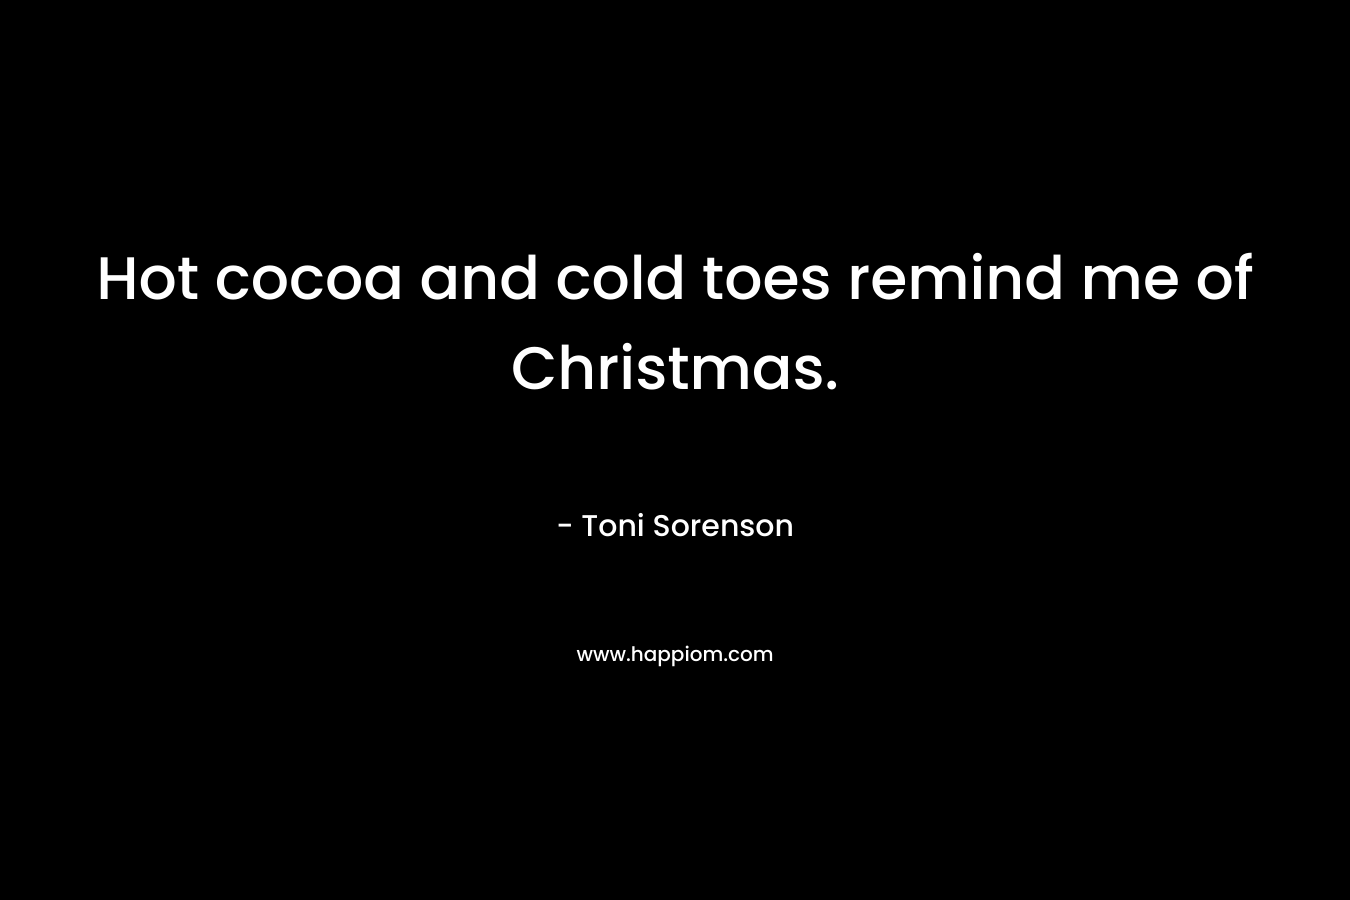 Hot cocoa and cold toes remind me of Christmas. – Toni Sorenson